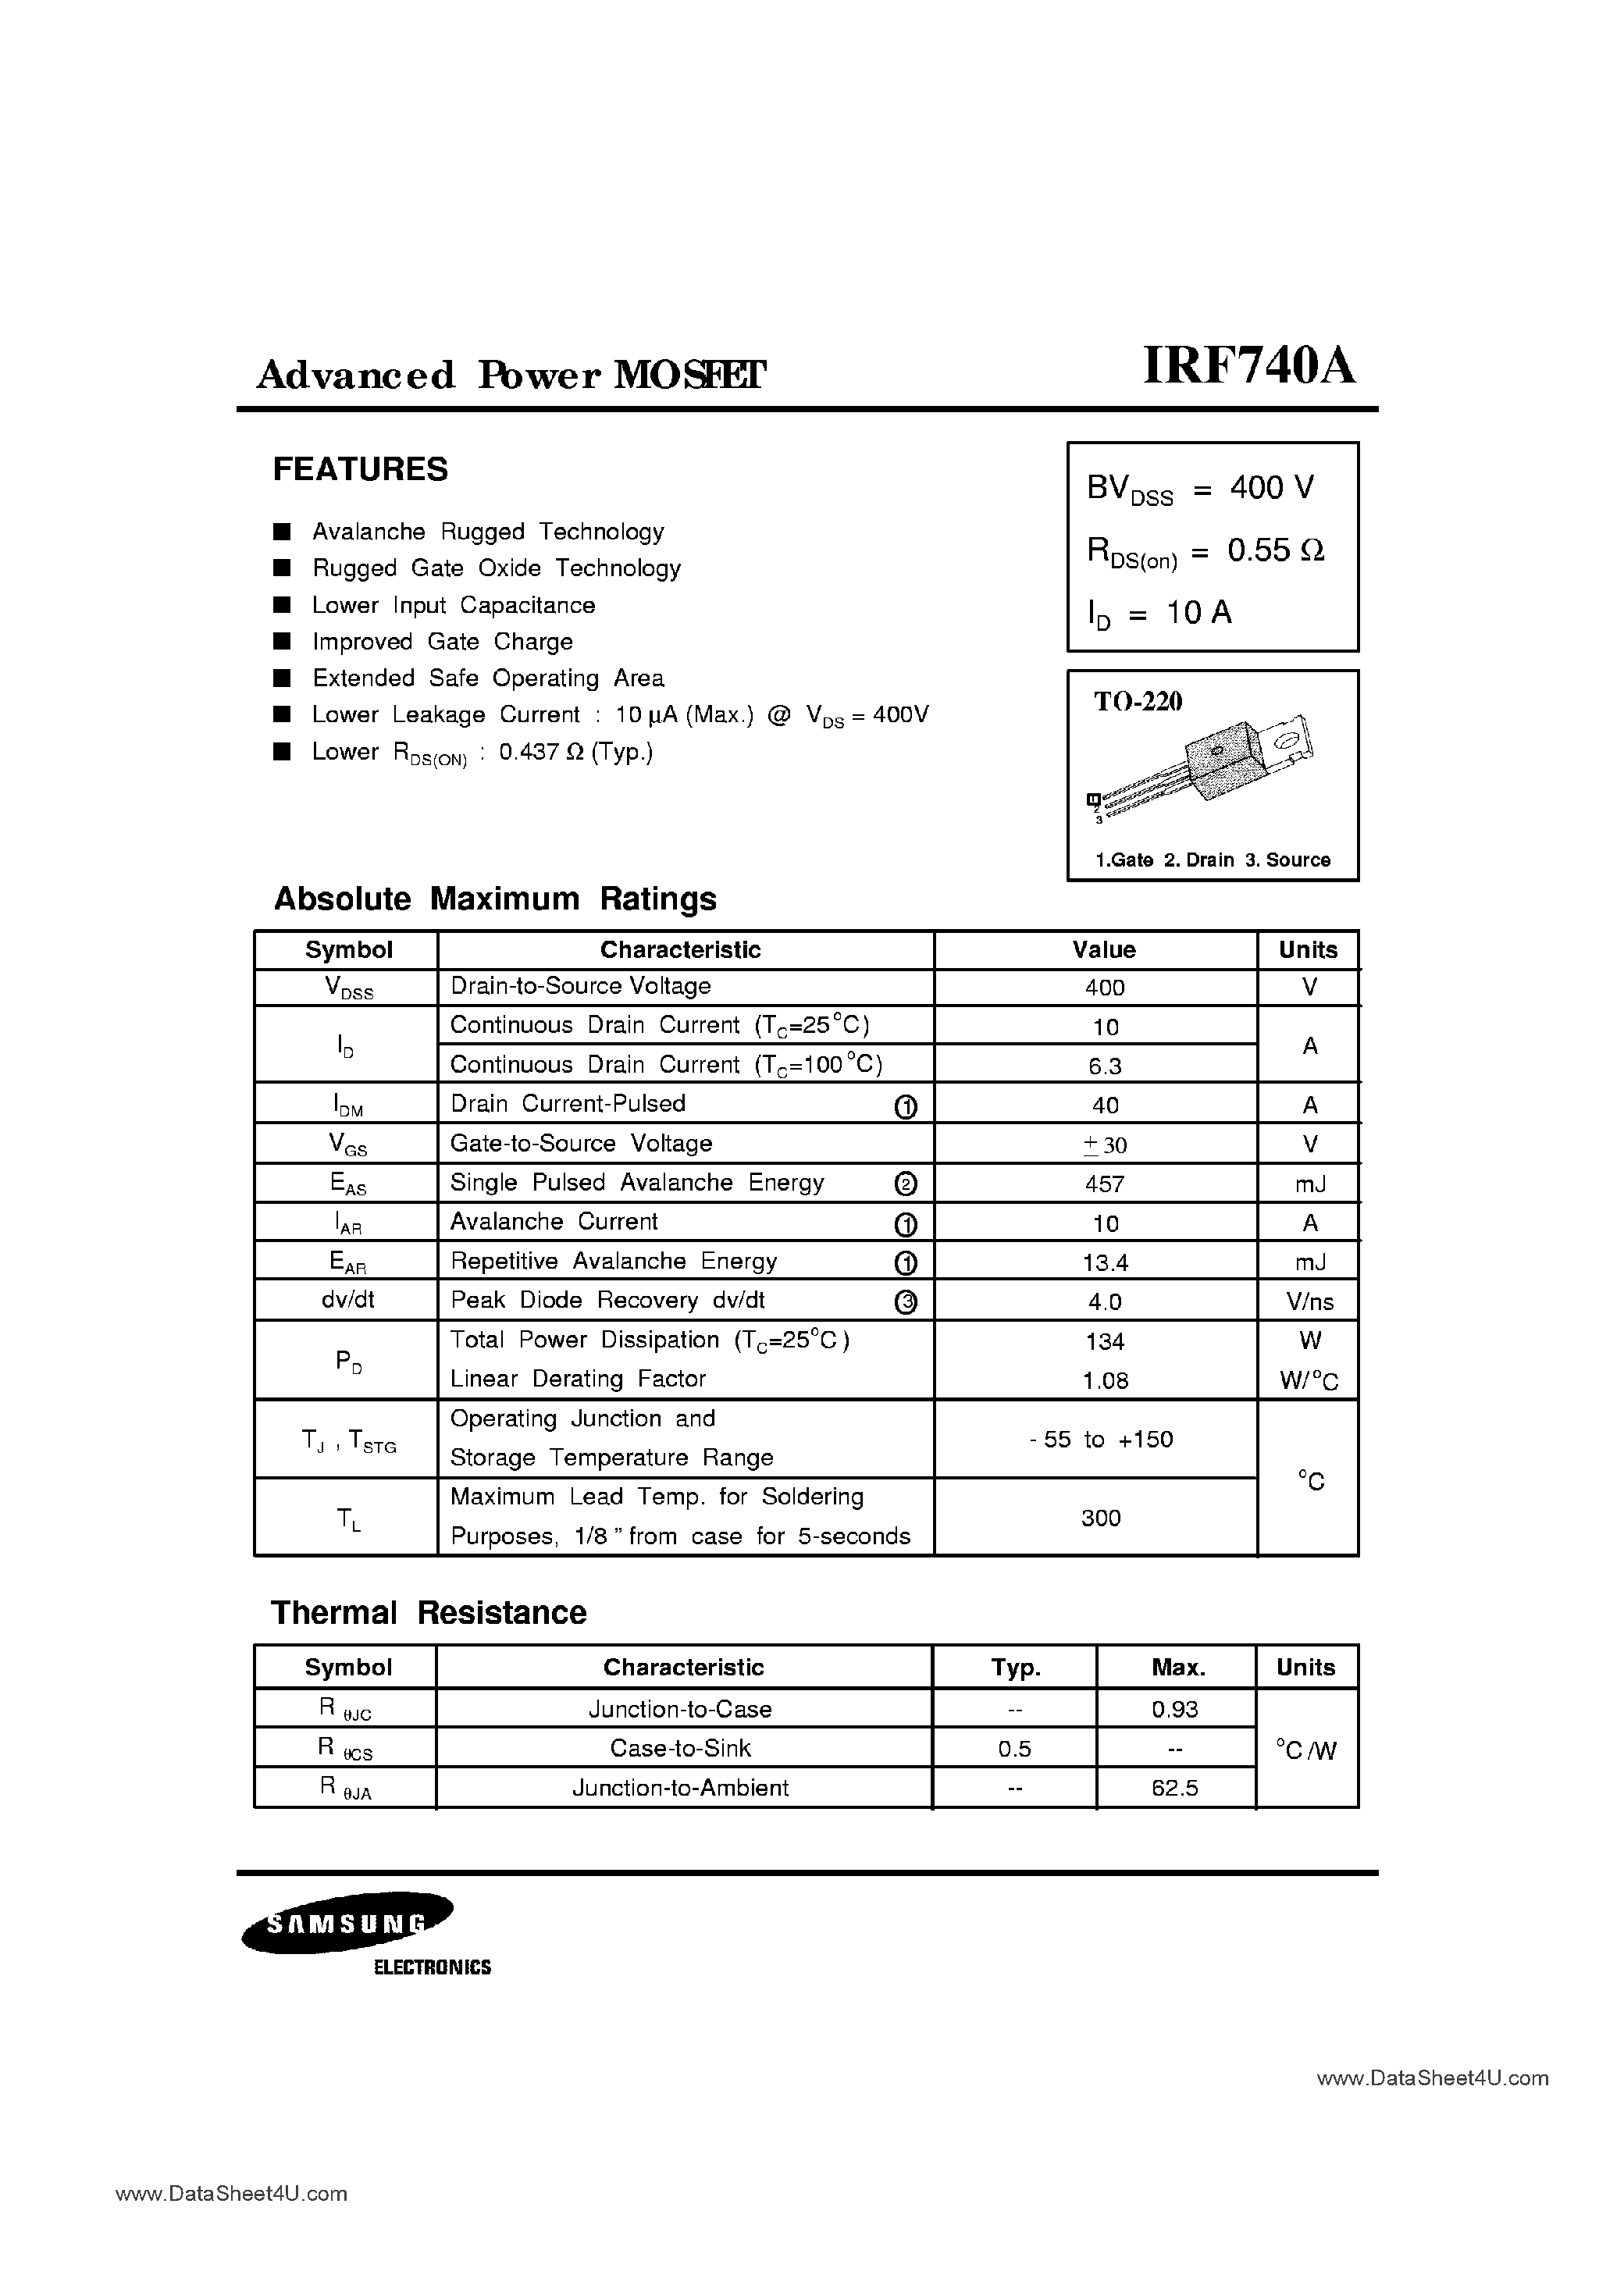 Datasheet IRF740A - Advanced Power MOSFET page 1